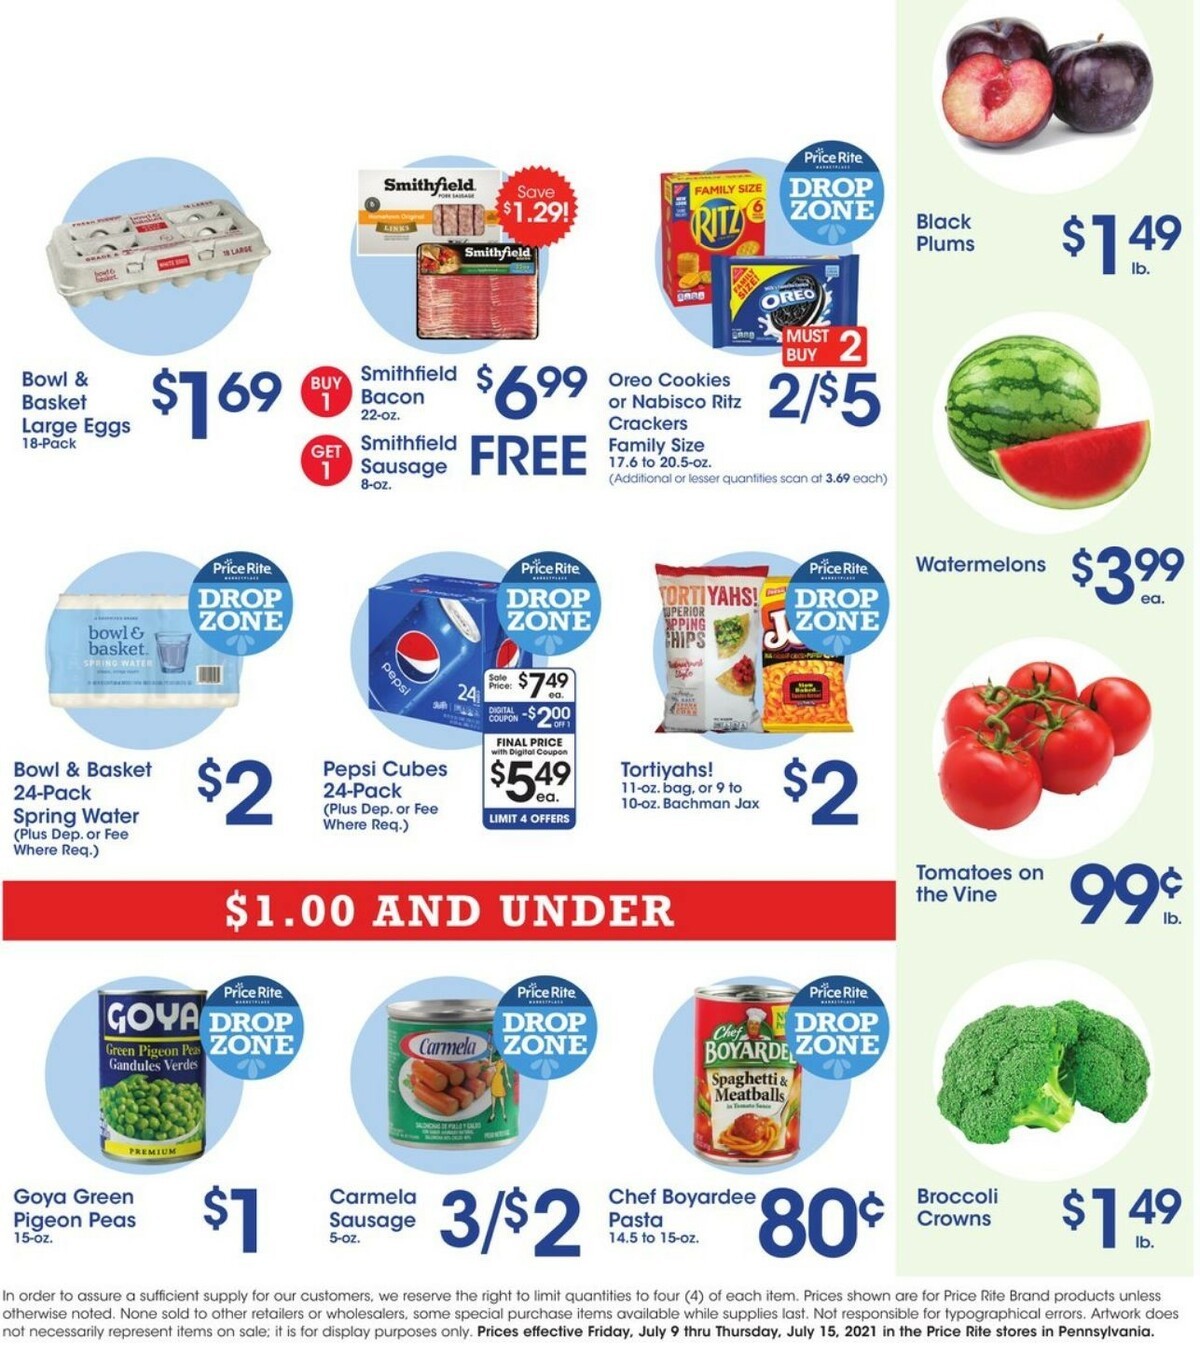 Price Rite Weekly Ad from July 9